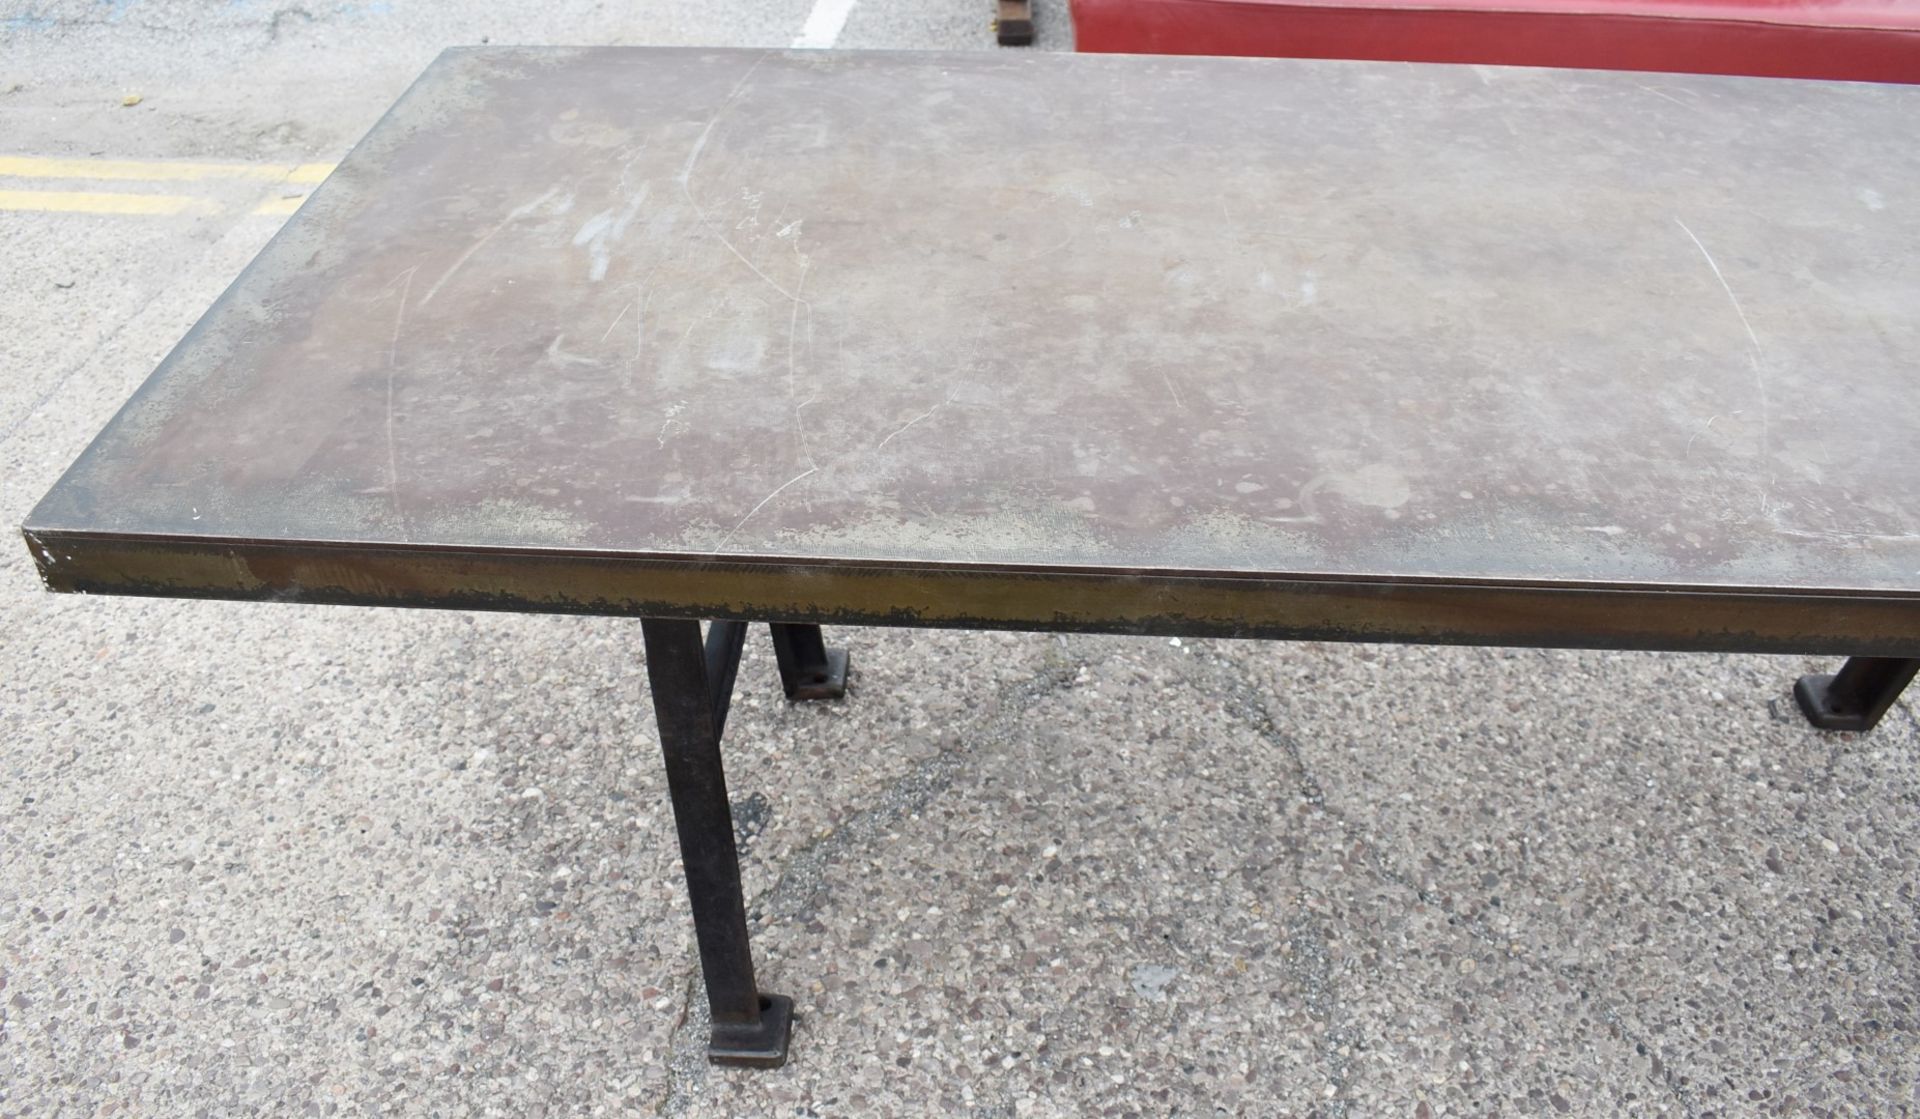 1 x Industrial Style 200cm Banquetting Restaurant Table Featuring a Heavy Steel Top & Steel Legs - Image 18 of 23